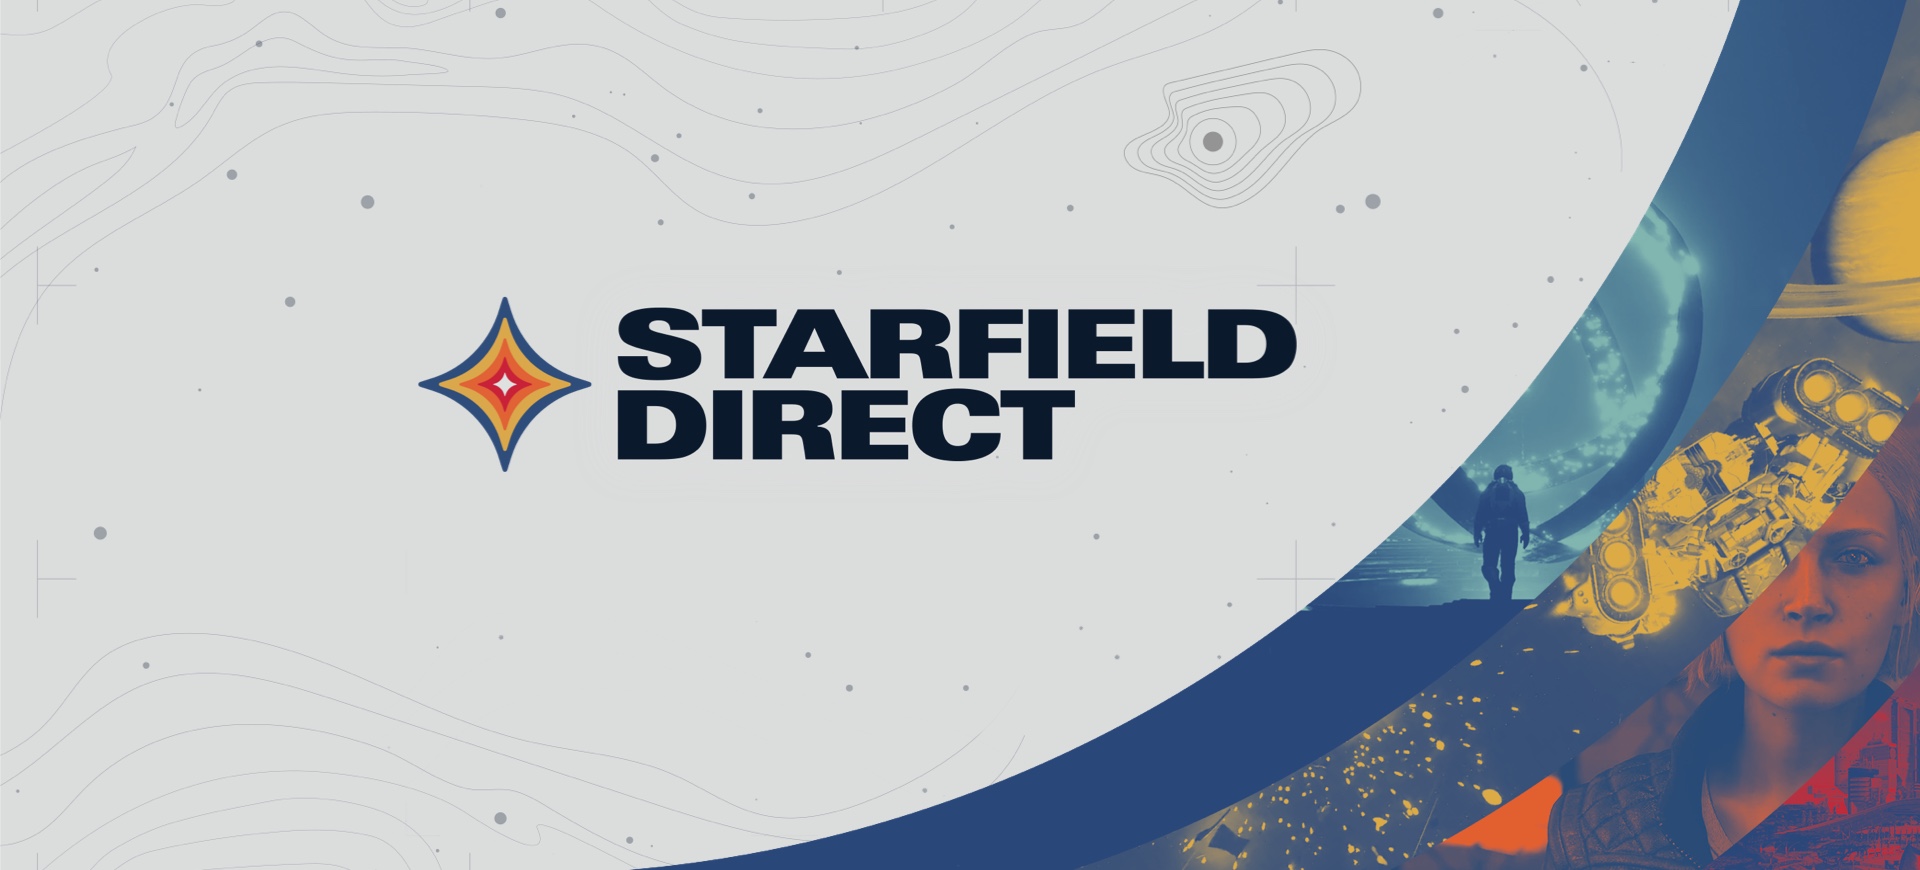 Get Ready for the Xbox Games Showcase and Starfield Direct Double Feature  Airing June 11 - Xbox Wire